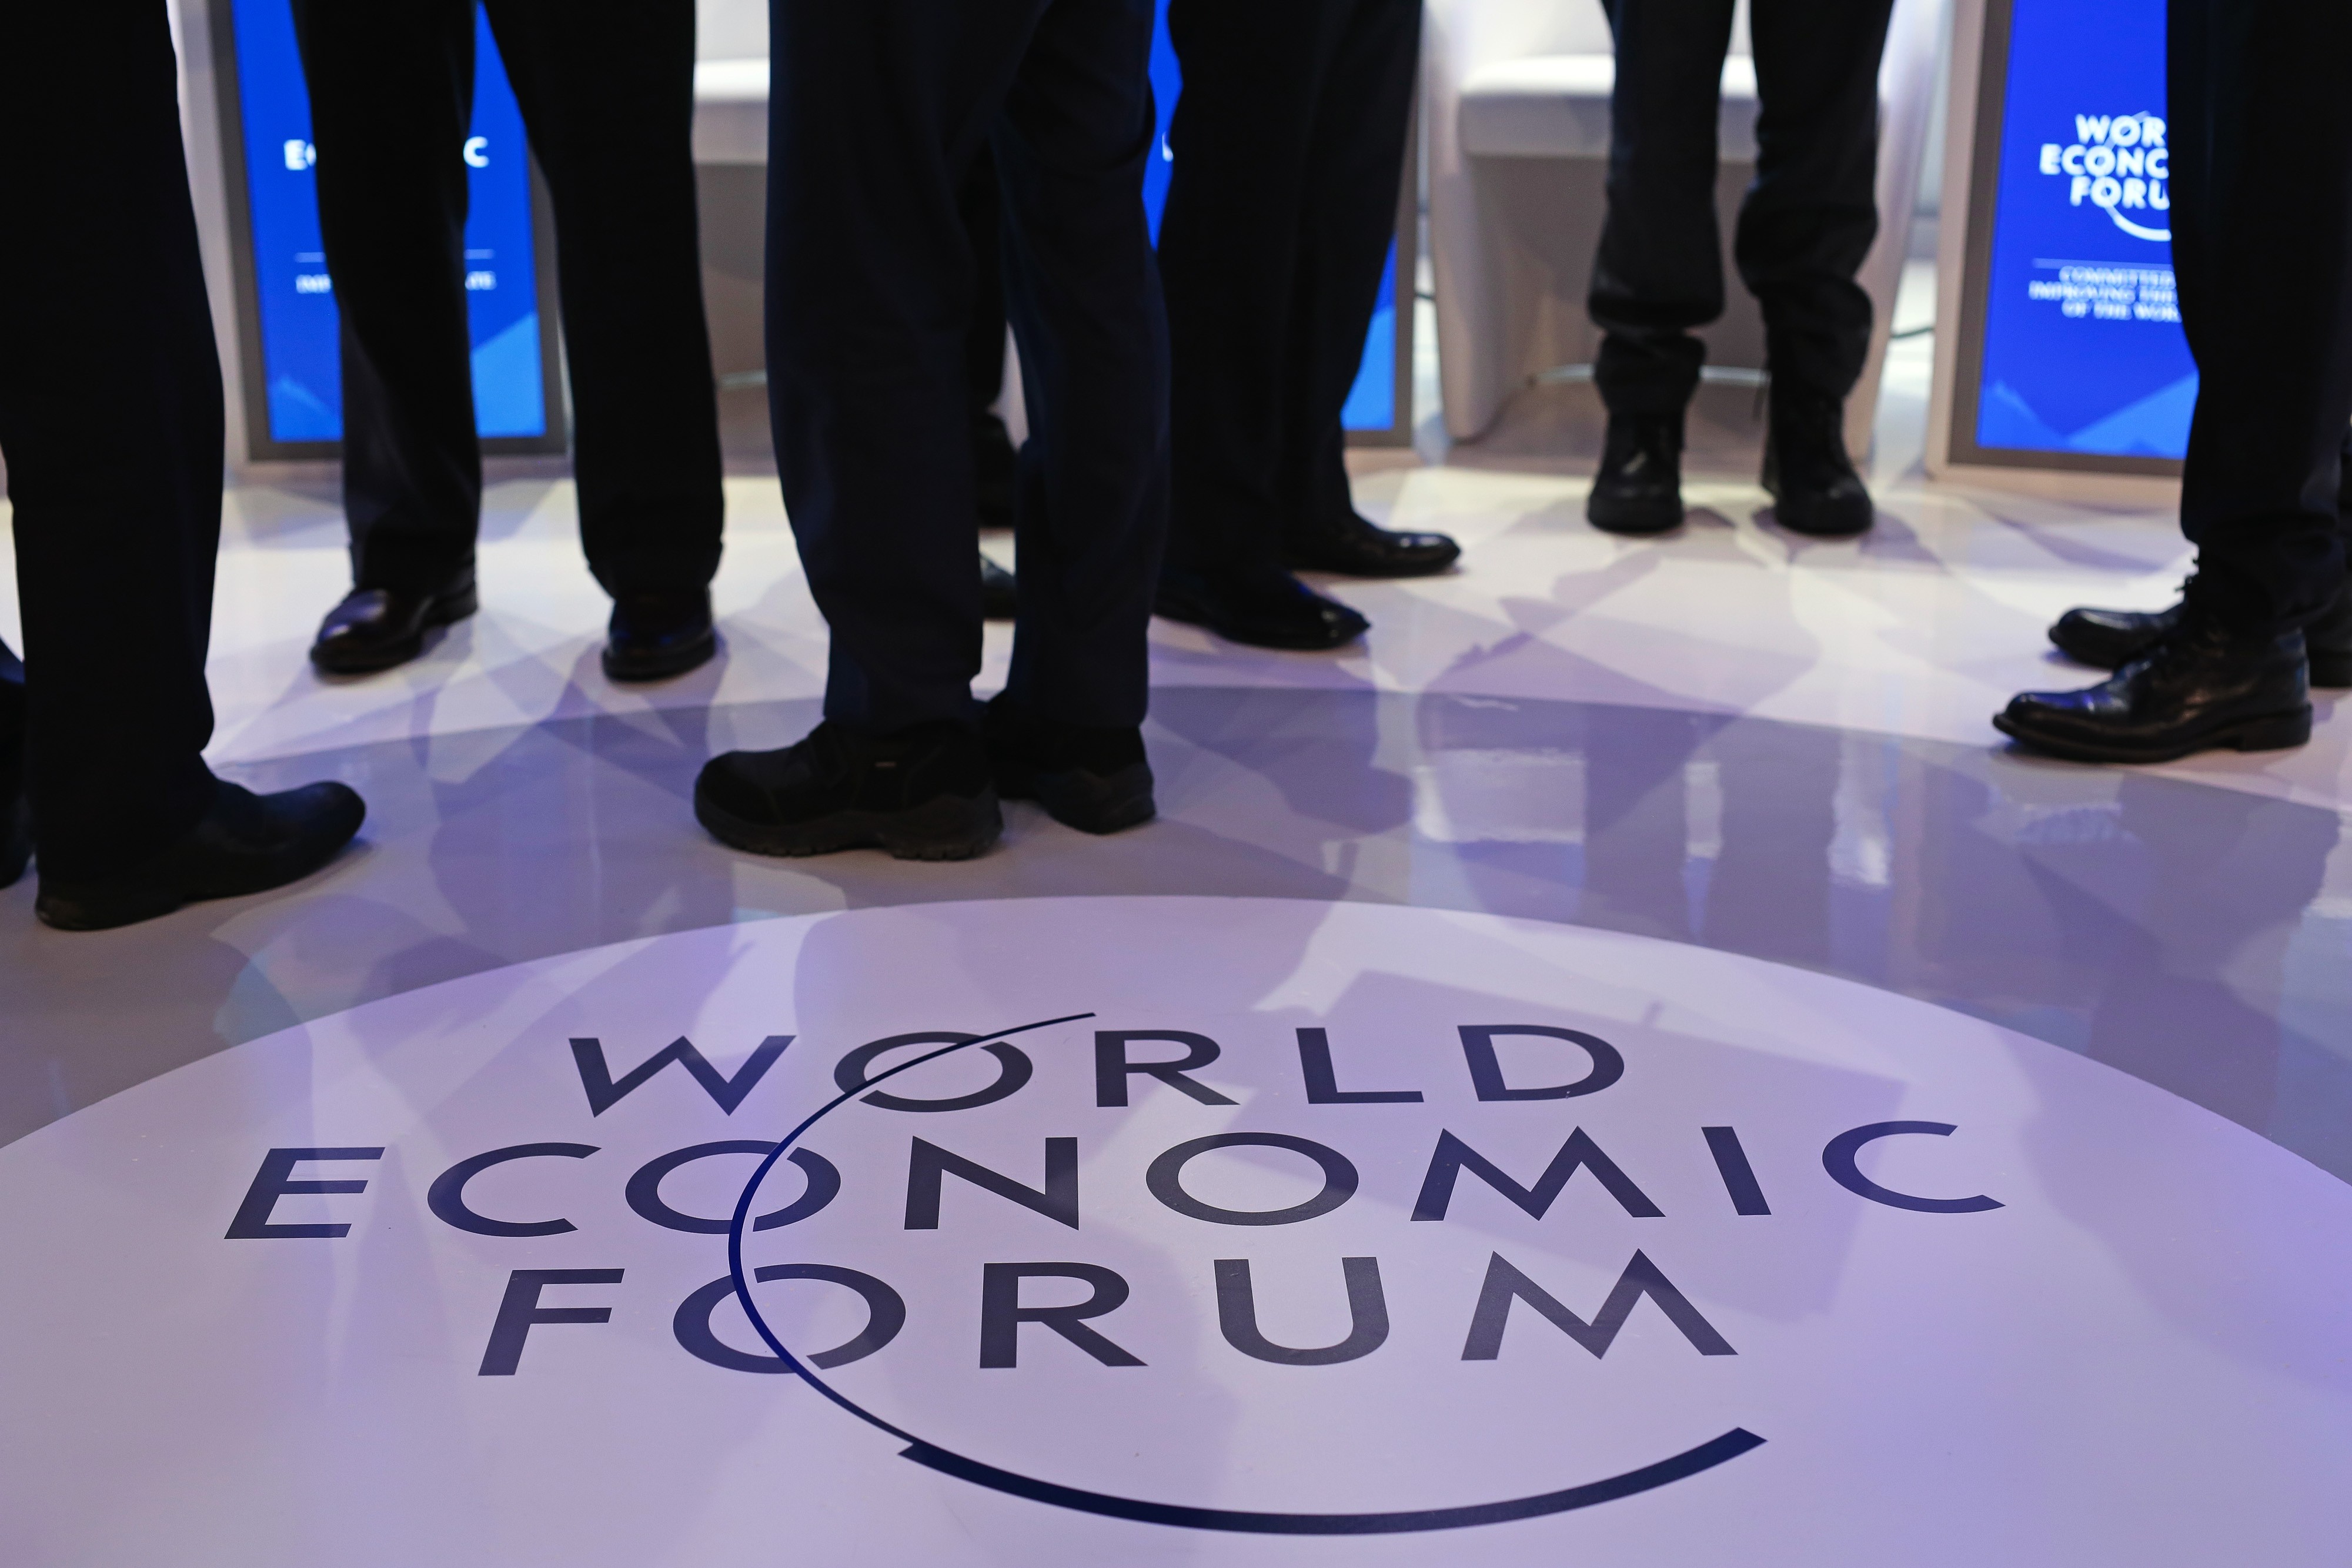 The next annual meeting of the World Economic Forum in Davos, Switzerland, looks set to be dominated by discussions of the fourth industrial revolution and its effects on communities around the world. Photo: Bloomberg